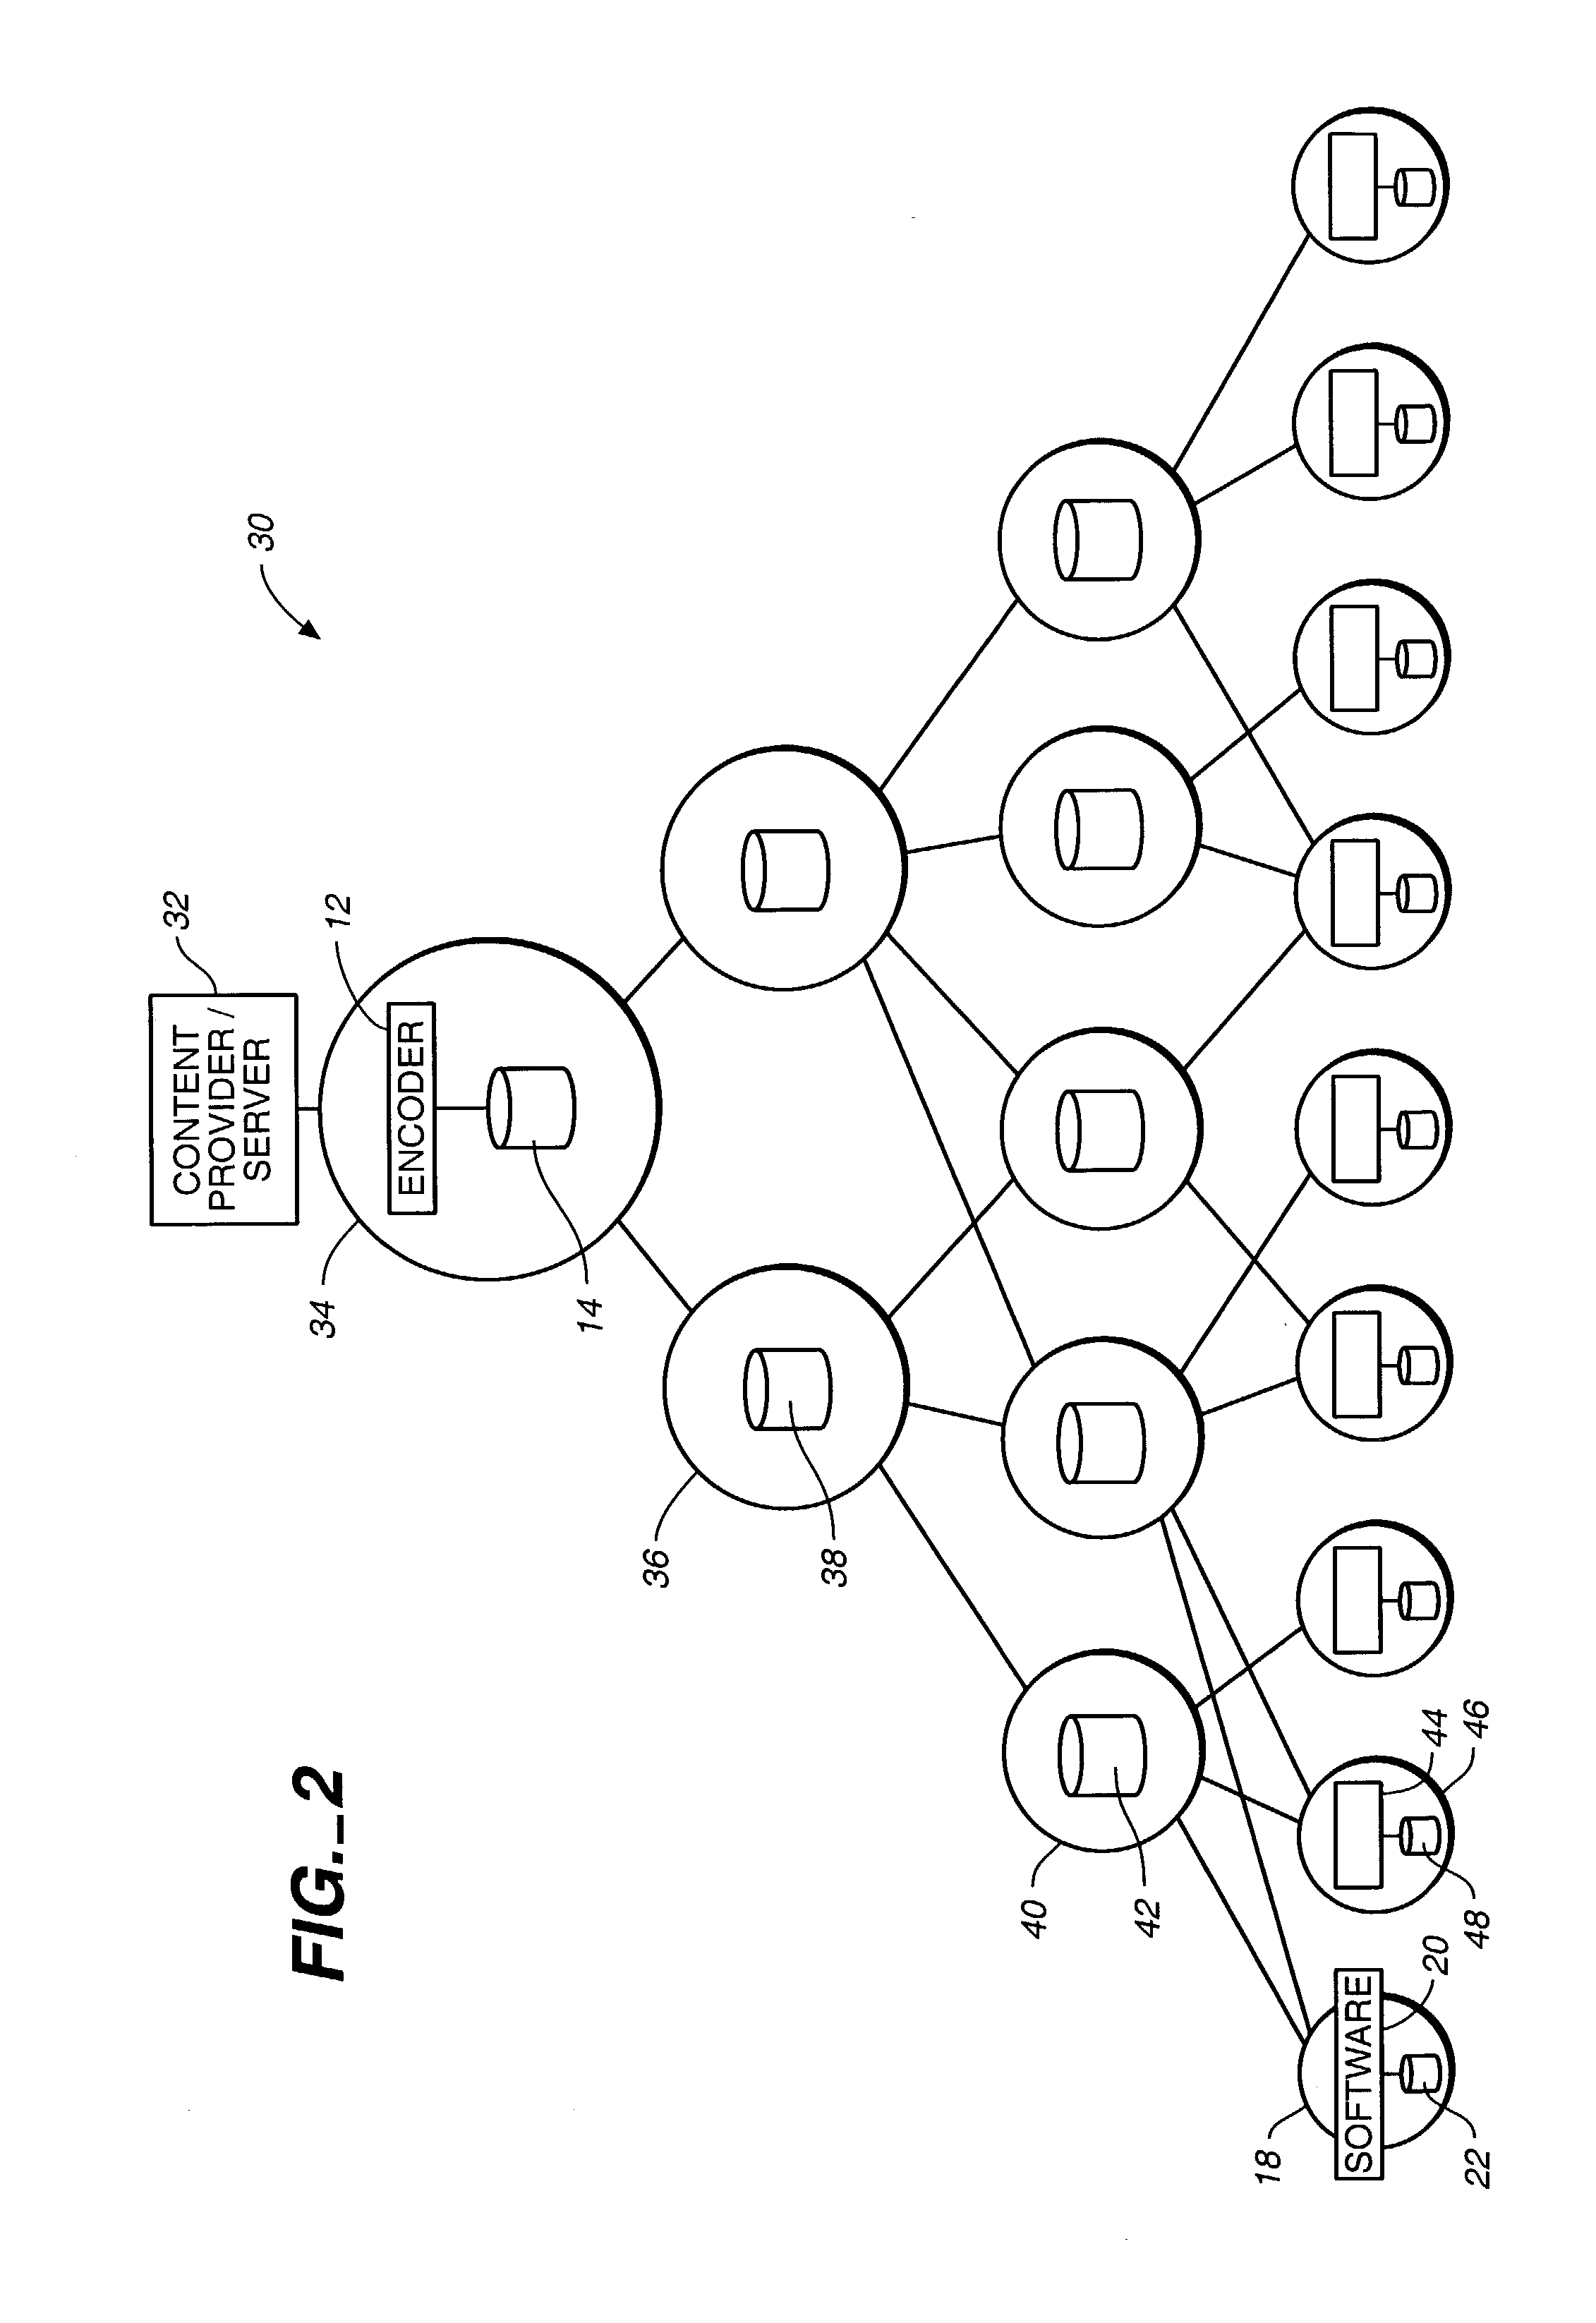 Method for accelerating delivery of content in a computer network